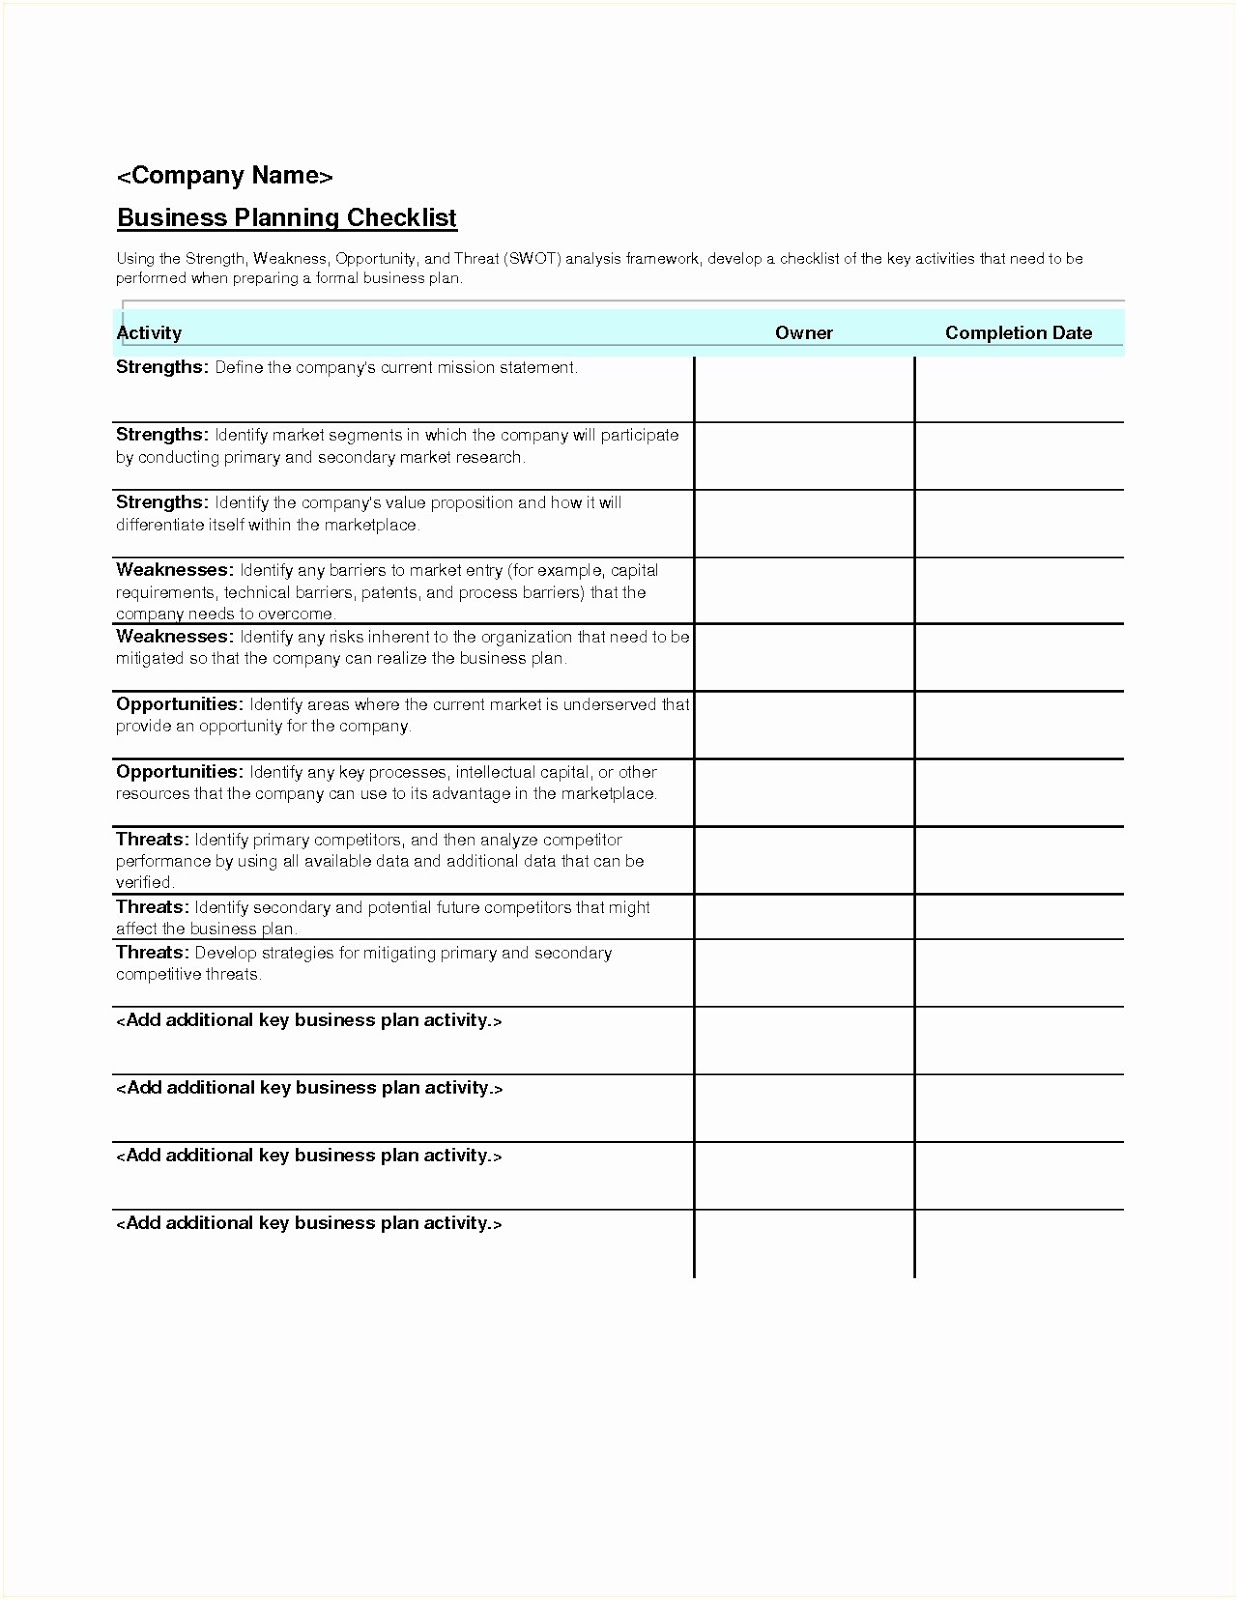 event planner template word 2019, event planner template wordpress, event checklist template word, event schedule template word 2020 , event calendar template wordpress, event plan template word, event calendar template word, events calendar template wordpress, event schedule format word, free event planner template word, event management plan template word